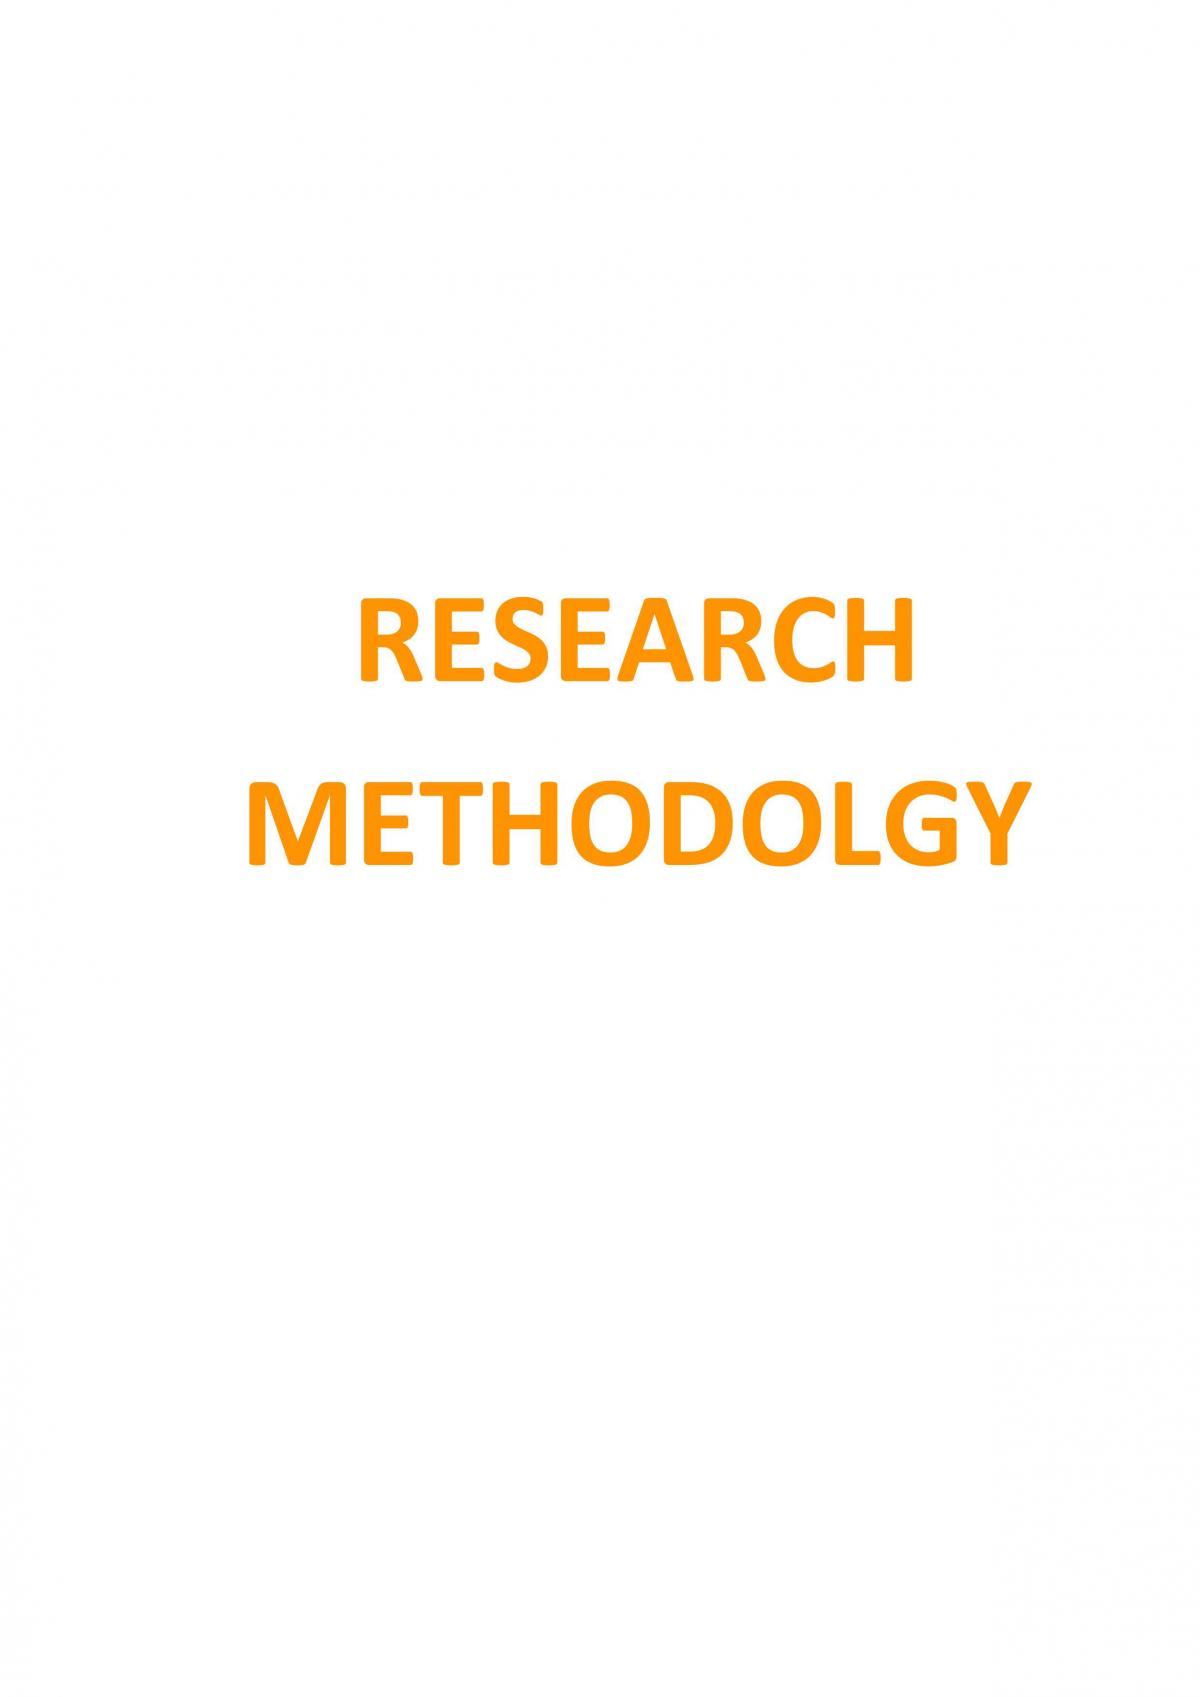 cafs research methodology questions